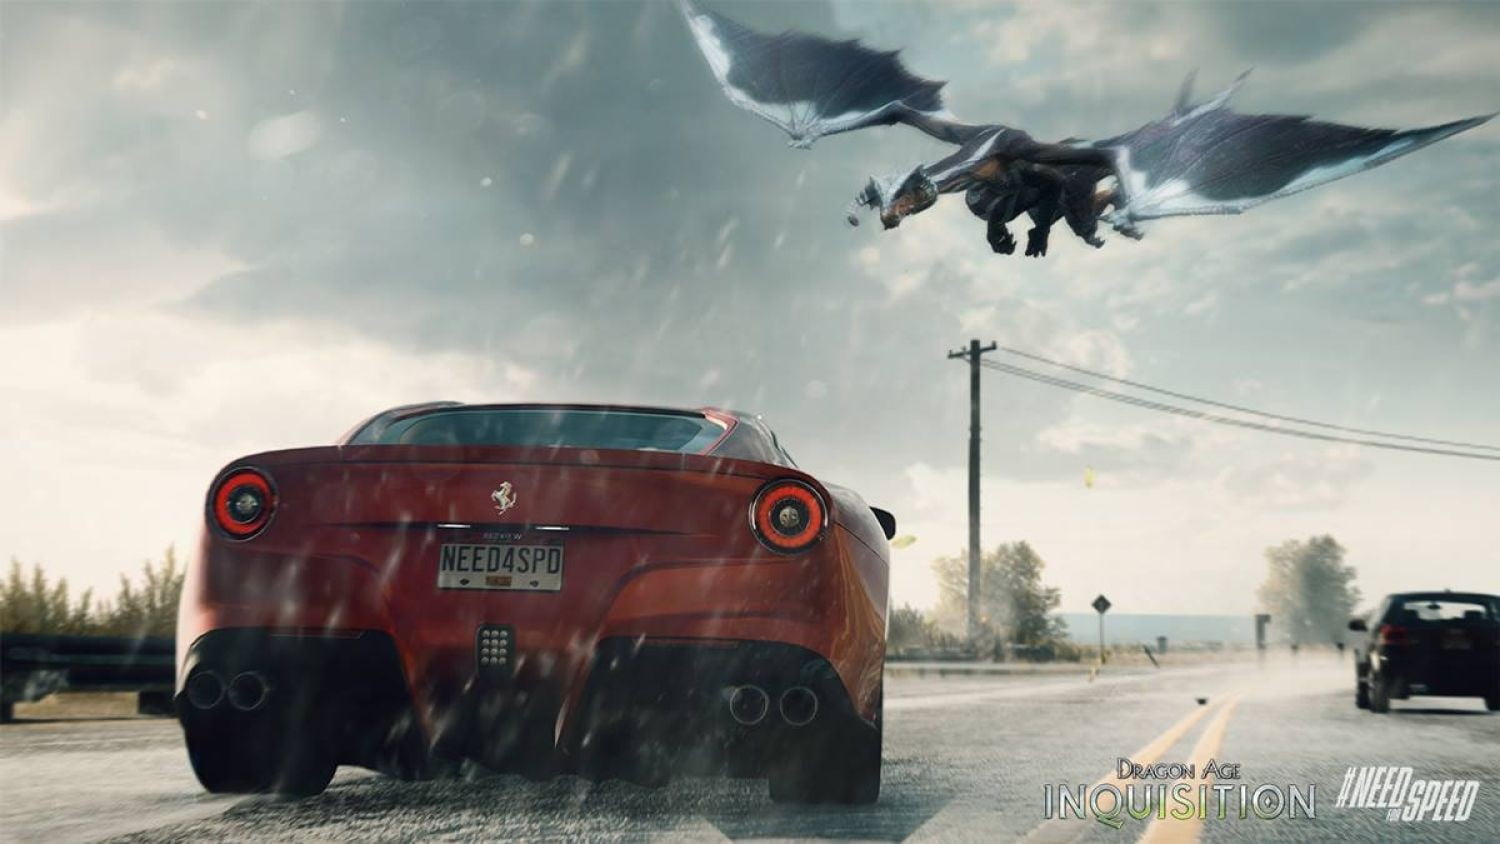 Need for Speed 3D wallpaper, Need for Speed: Rivals, Dragon Age Inquisition